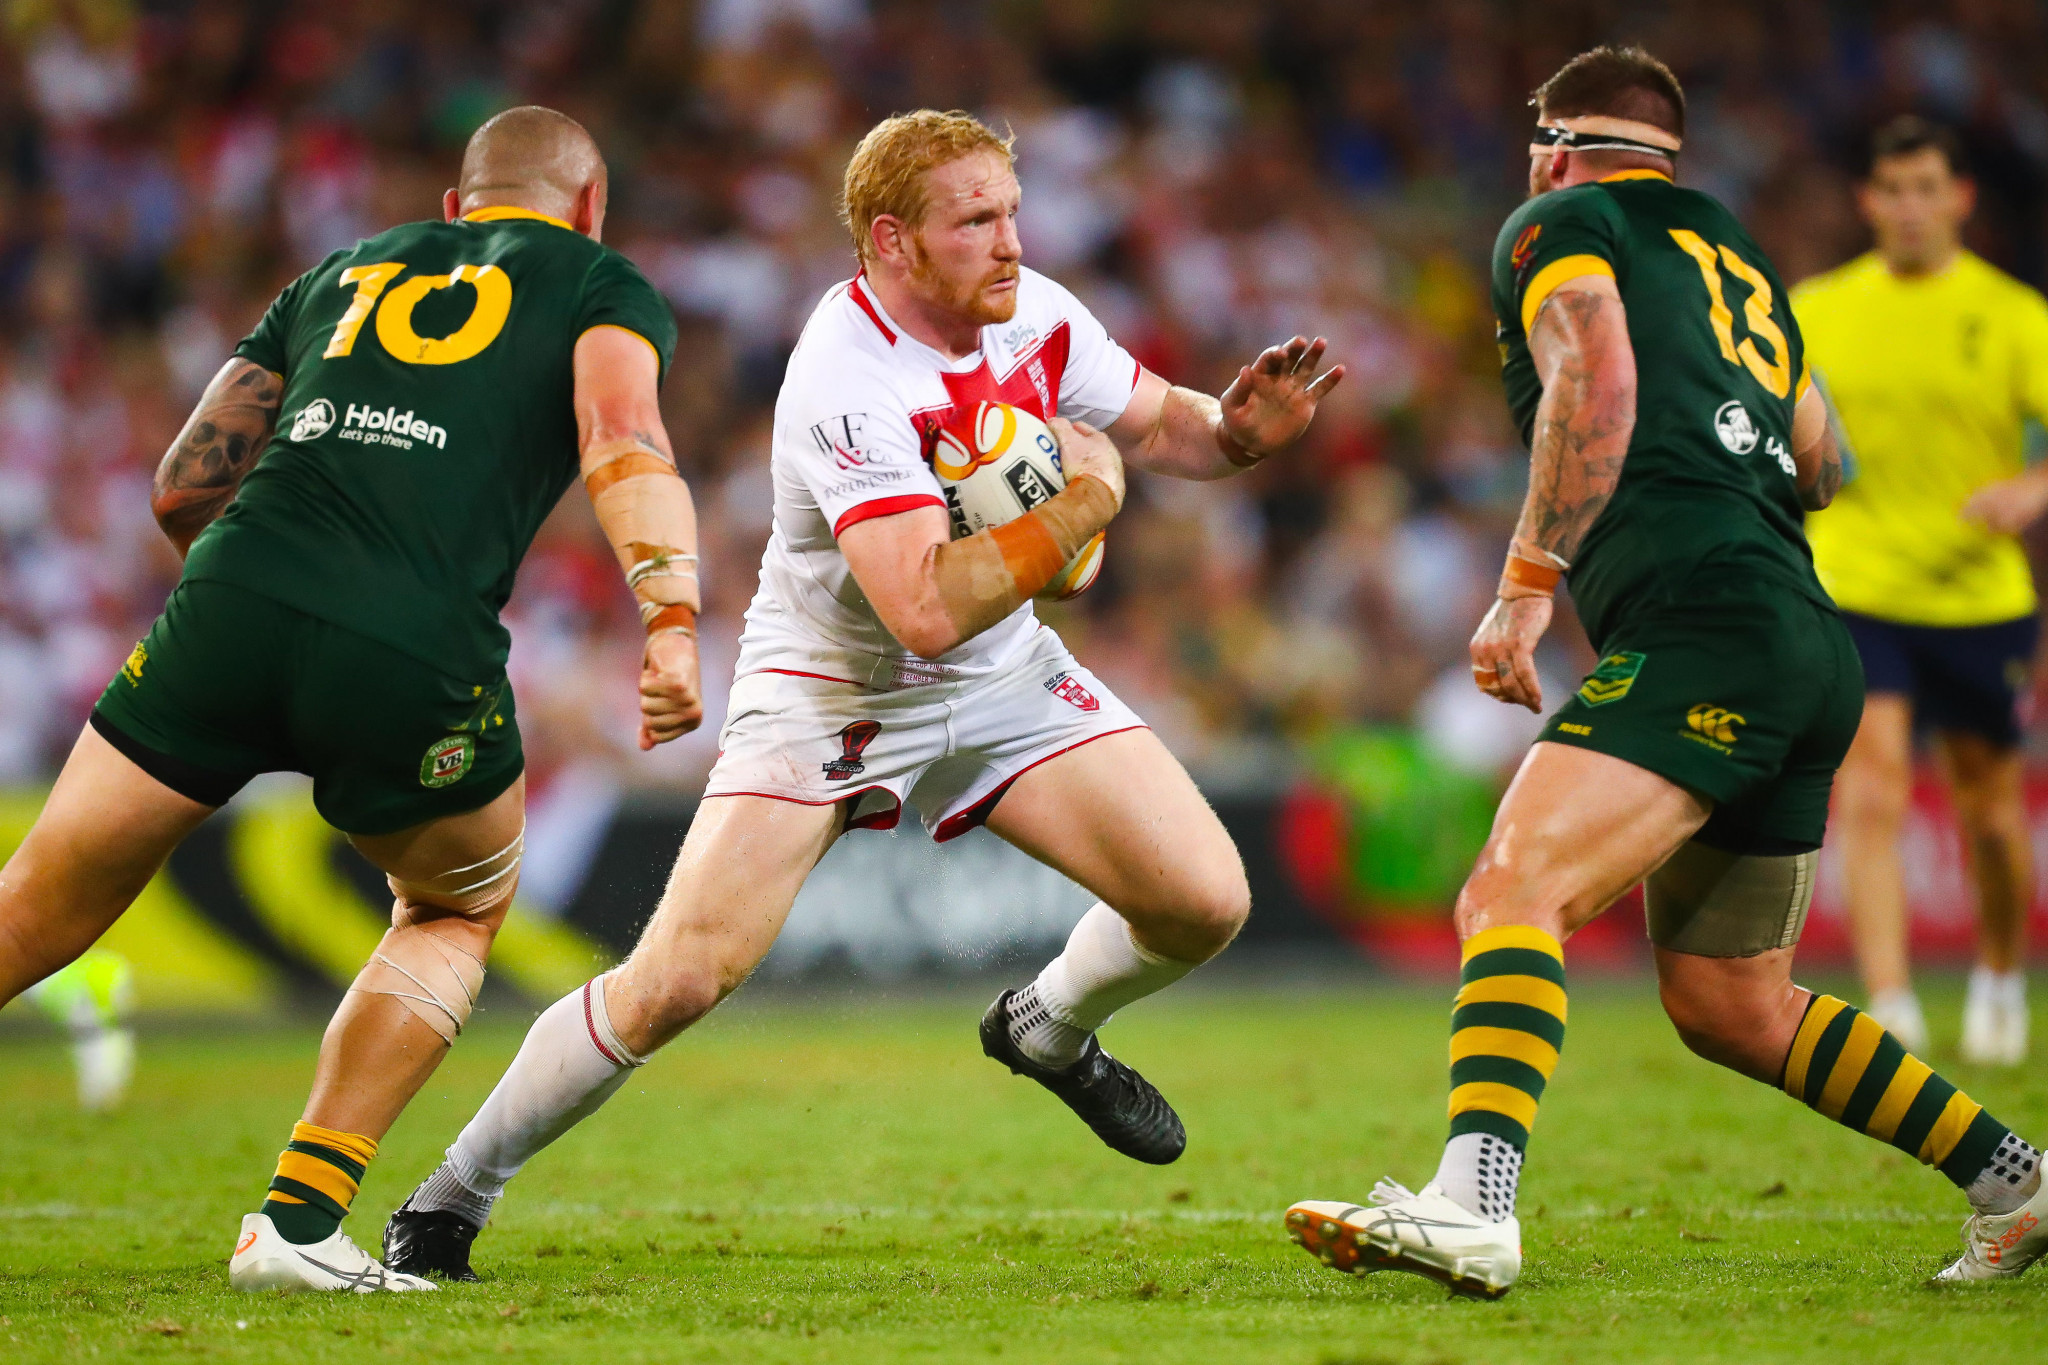 Rugby League International Federation updated on six new committees and working groups